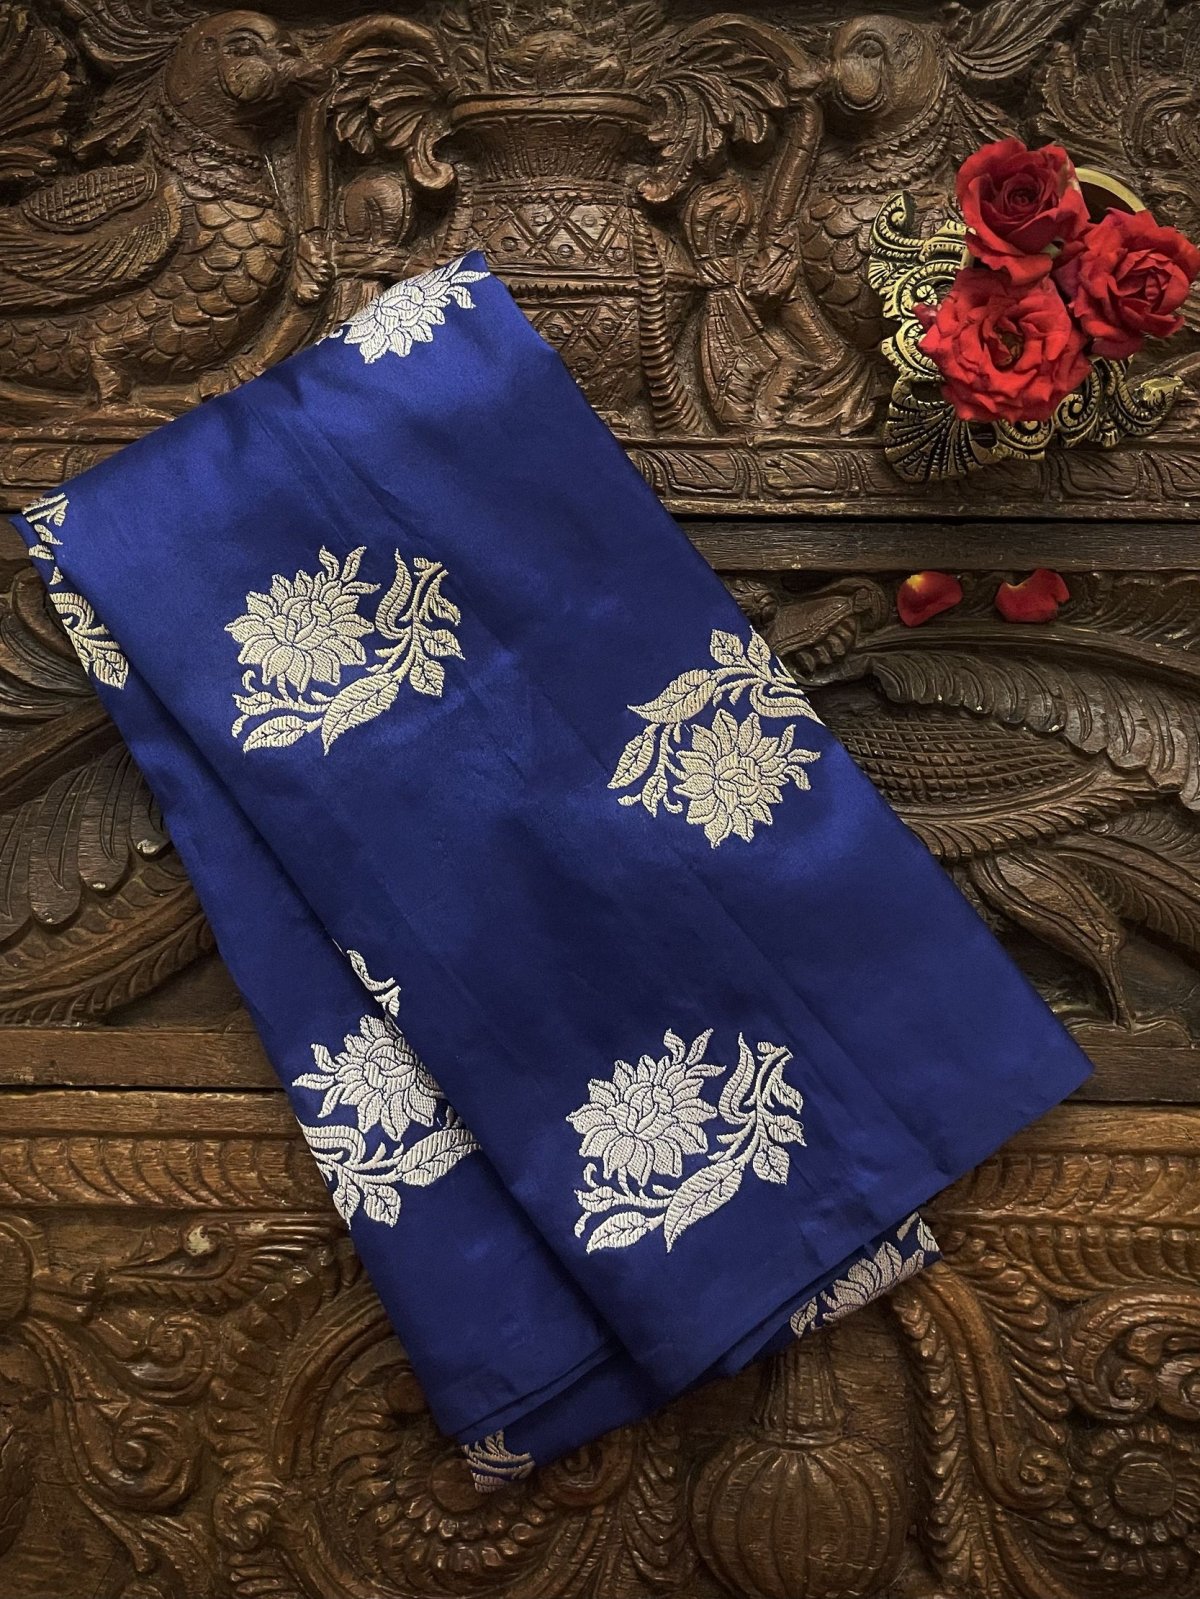 Royal Blue  Banaras Silk Blouse With Gold and Silver Zari Floral Butties